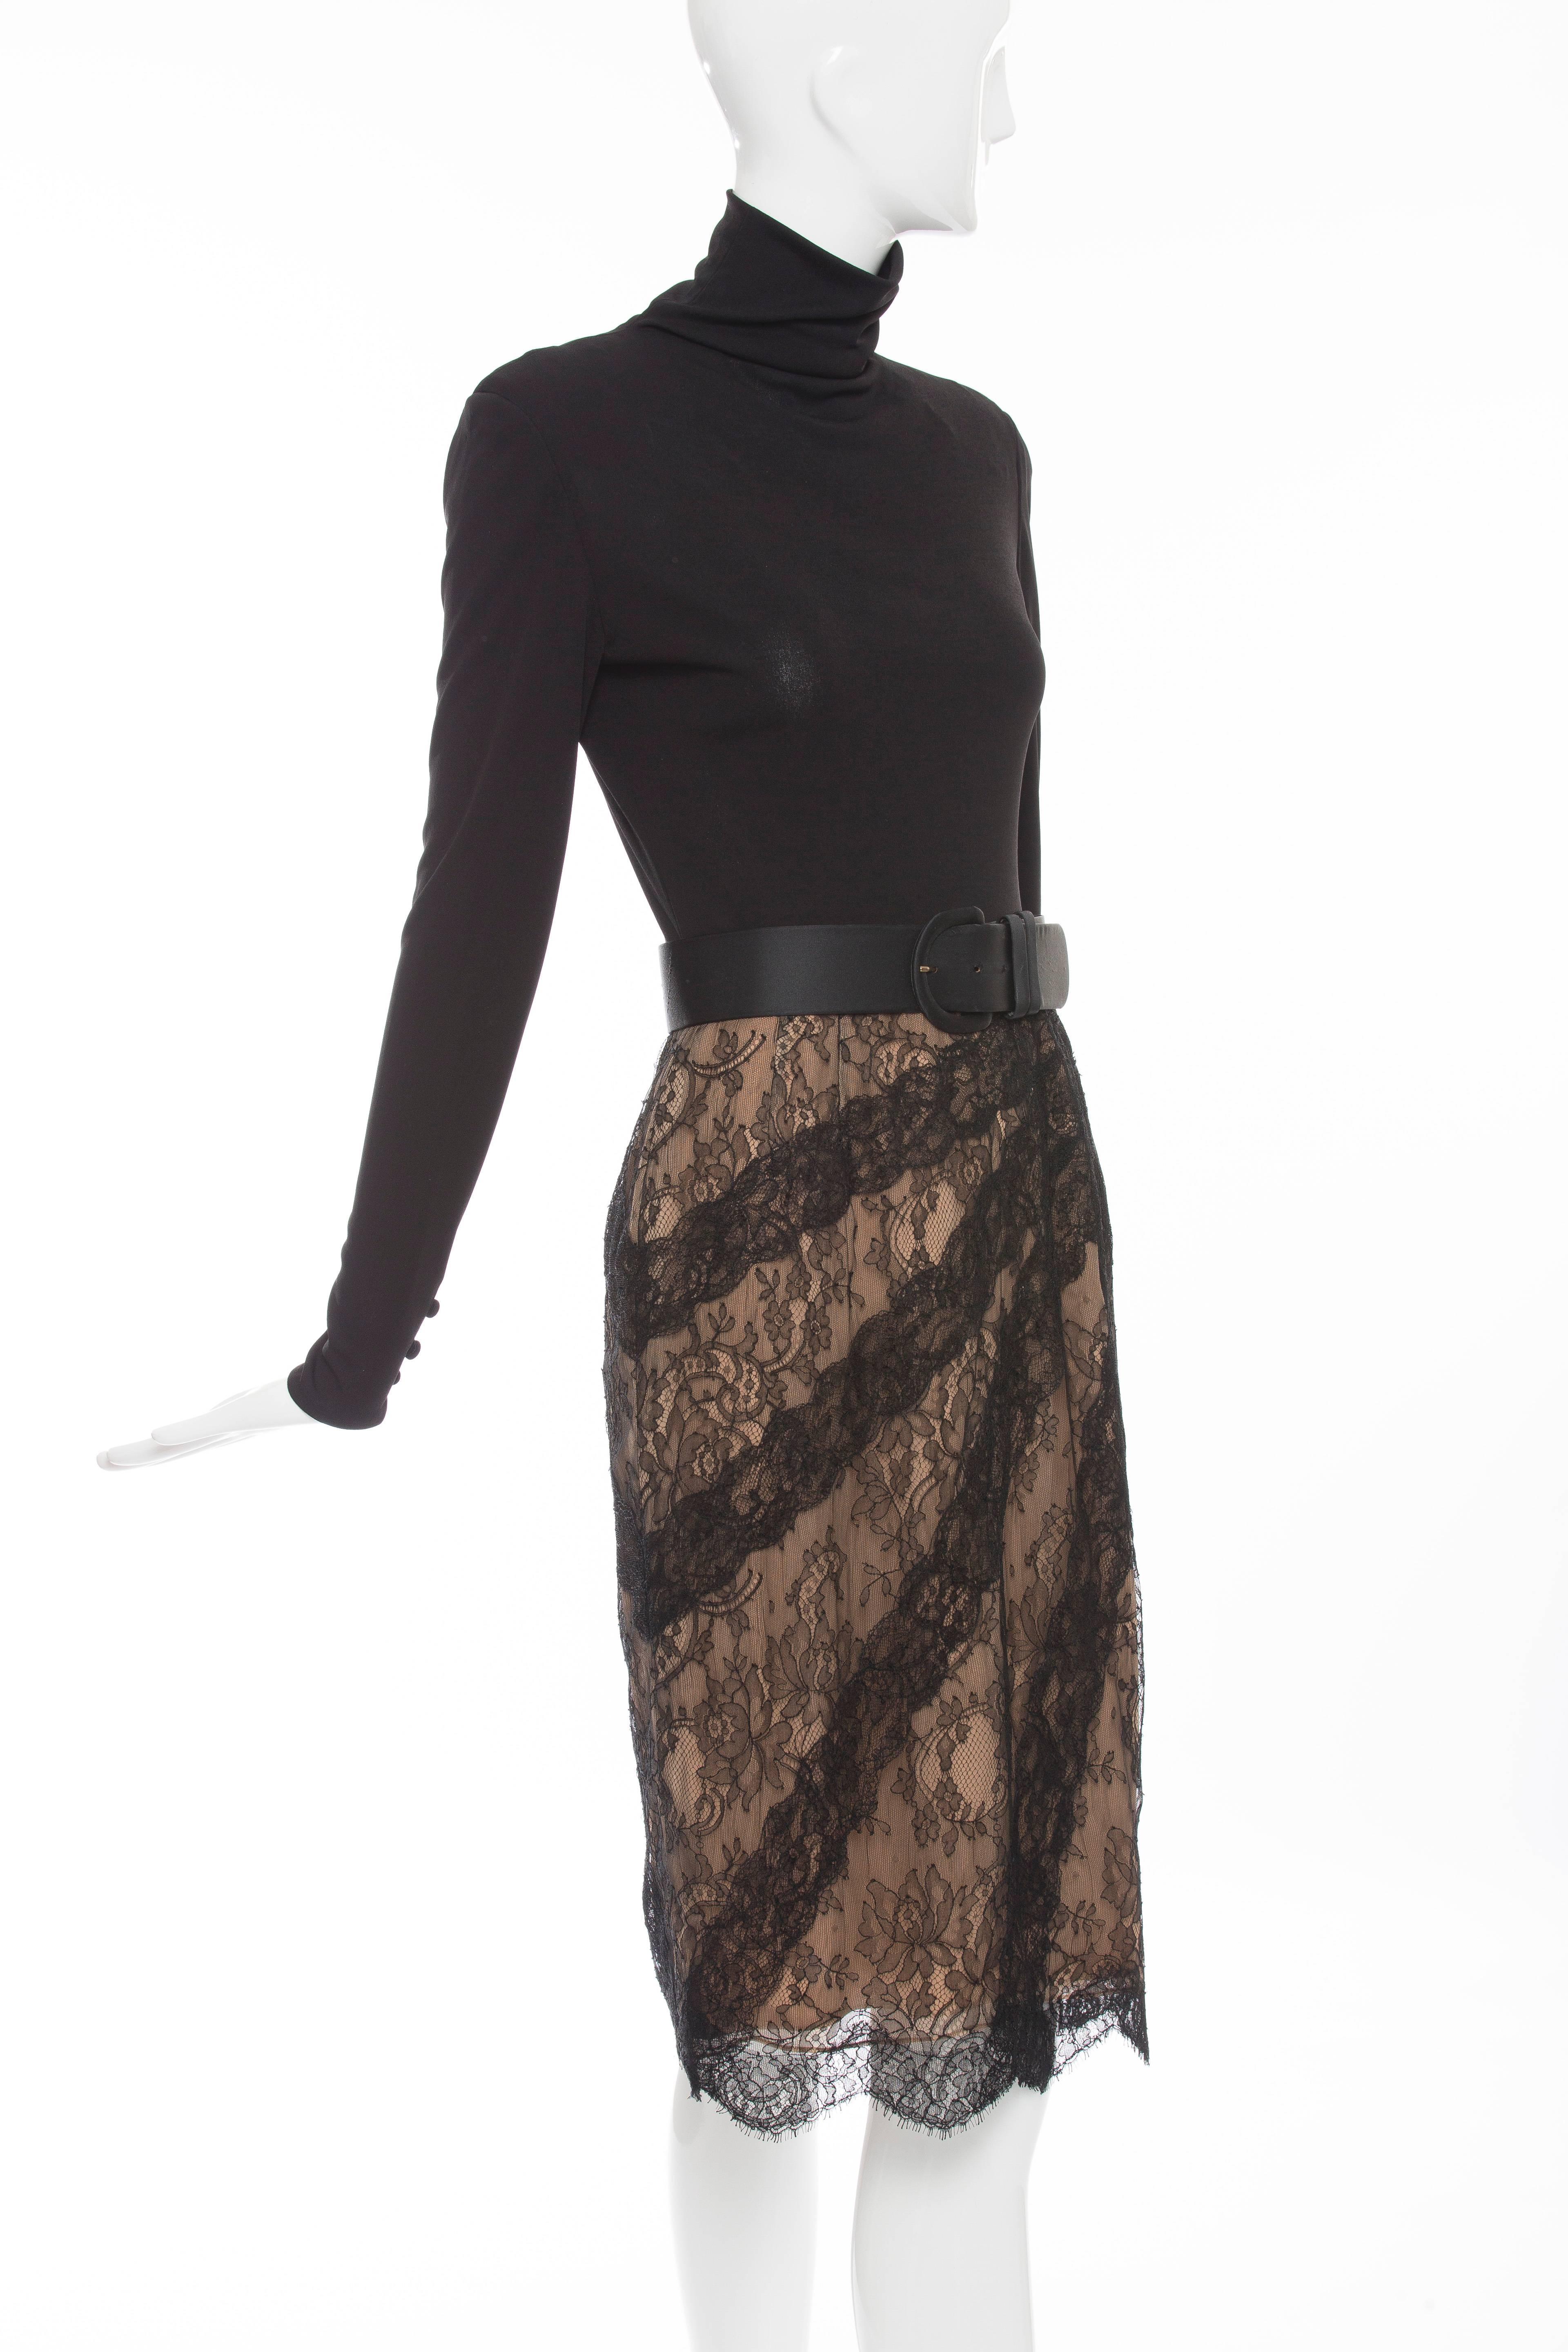 Women's Bill Blass Black Imported Lace Evening Dress, Circa 1980s For Sale